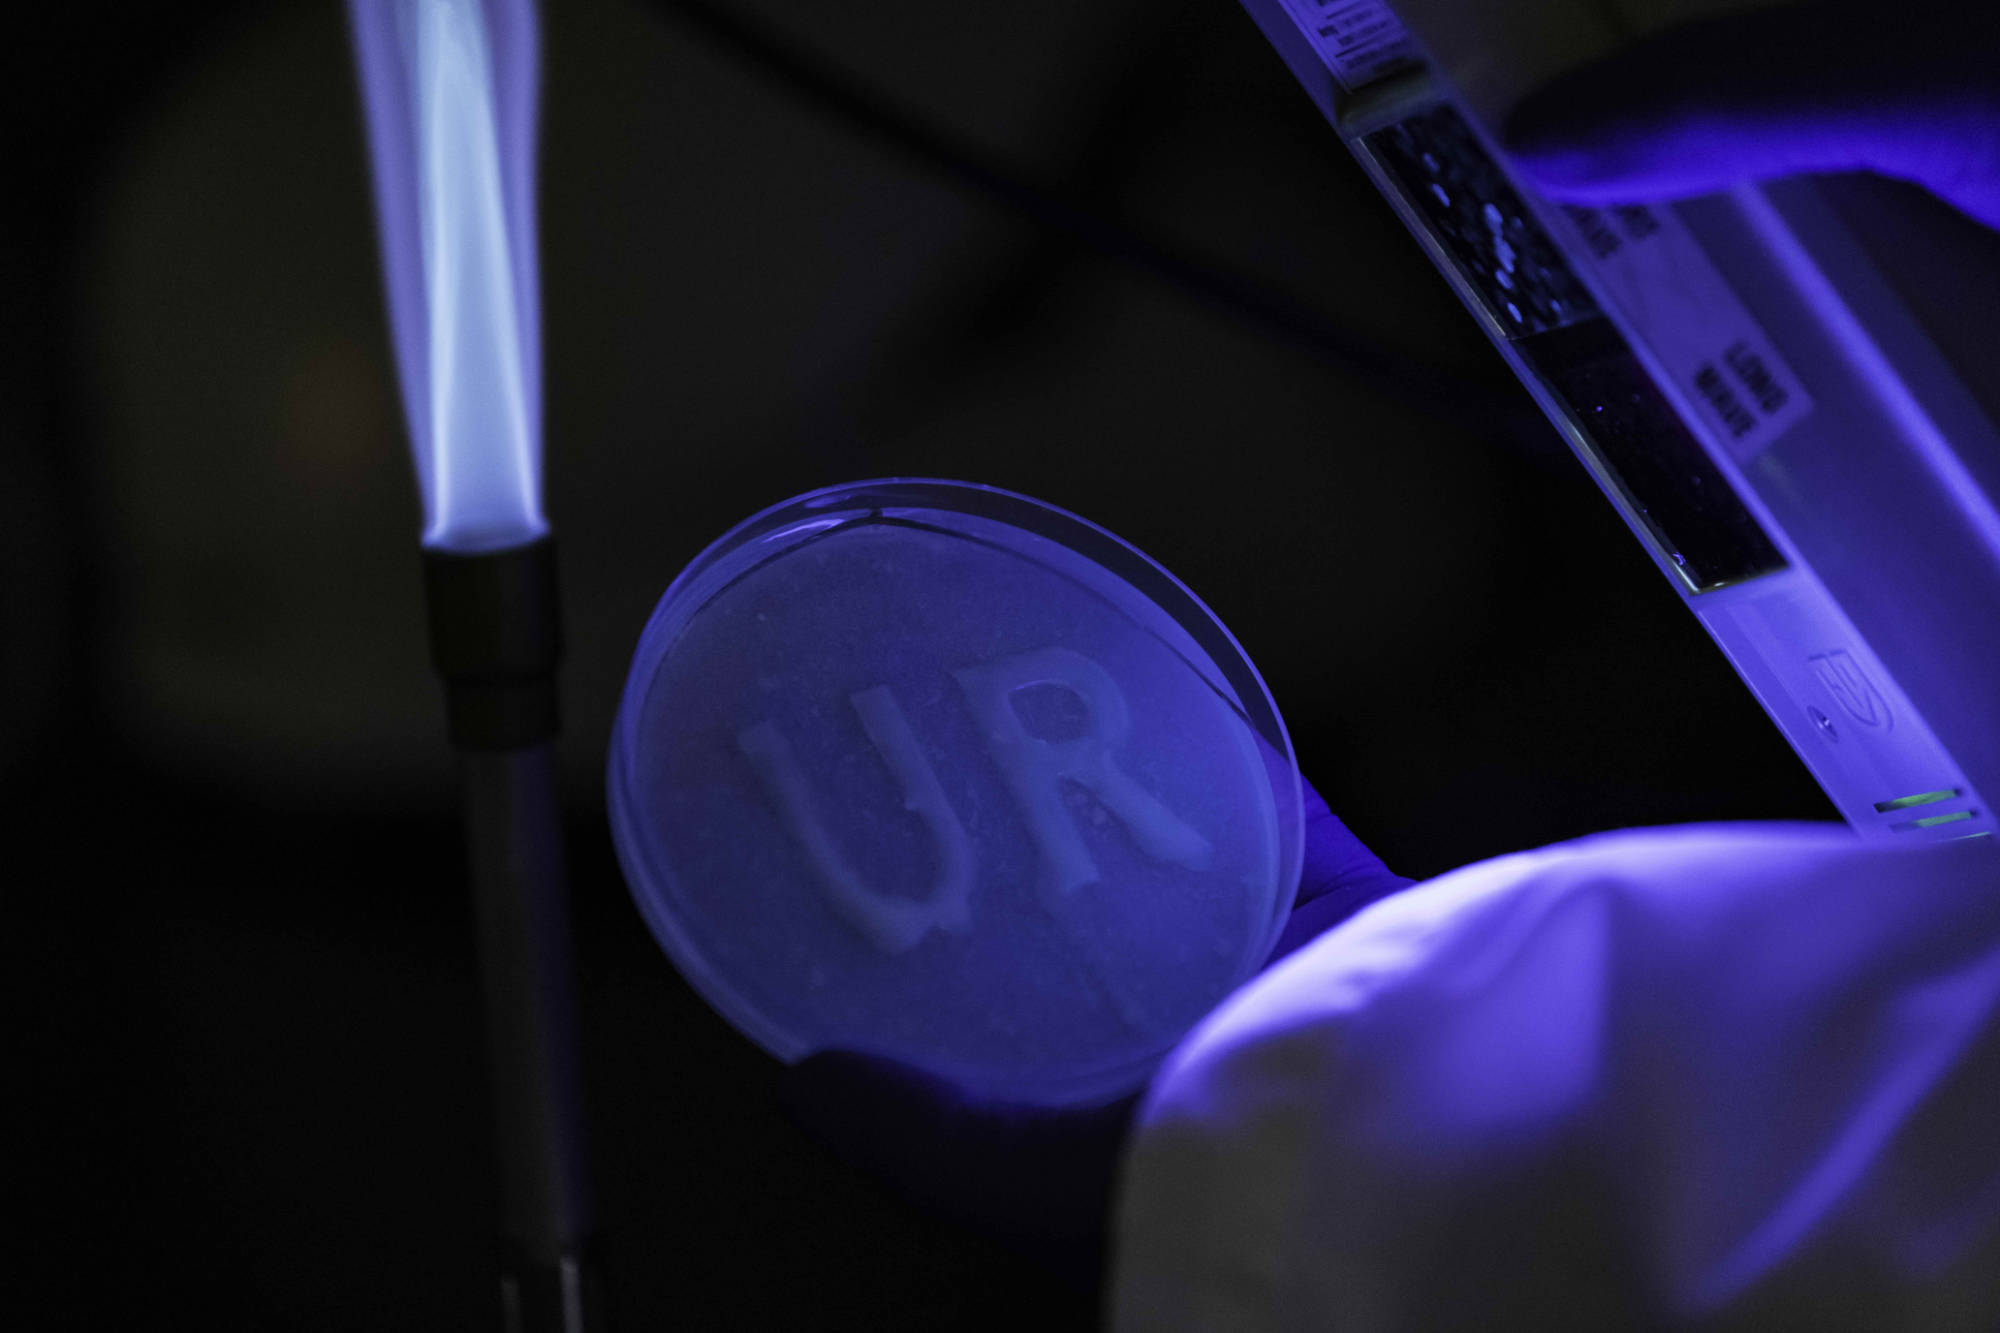 Alginate printed using 3d bioprinting into the letters UR contain green fluorescent proteins that glow under UV light.